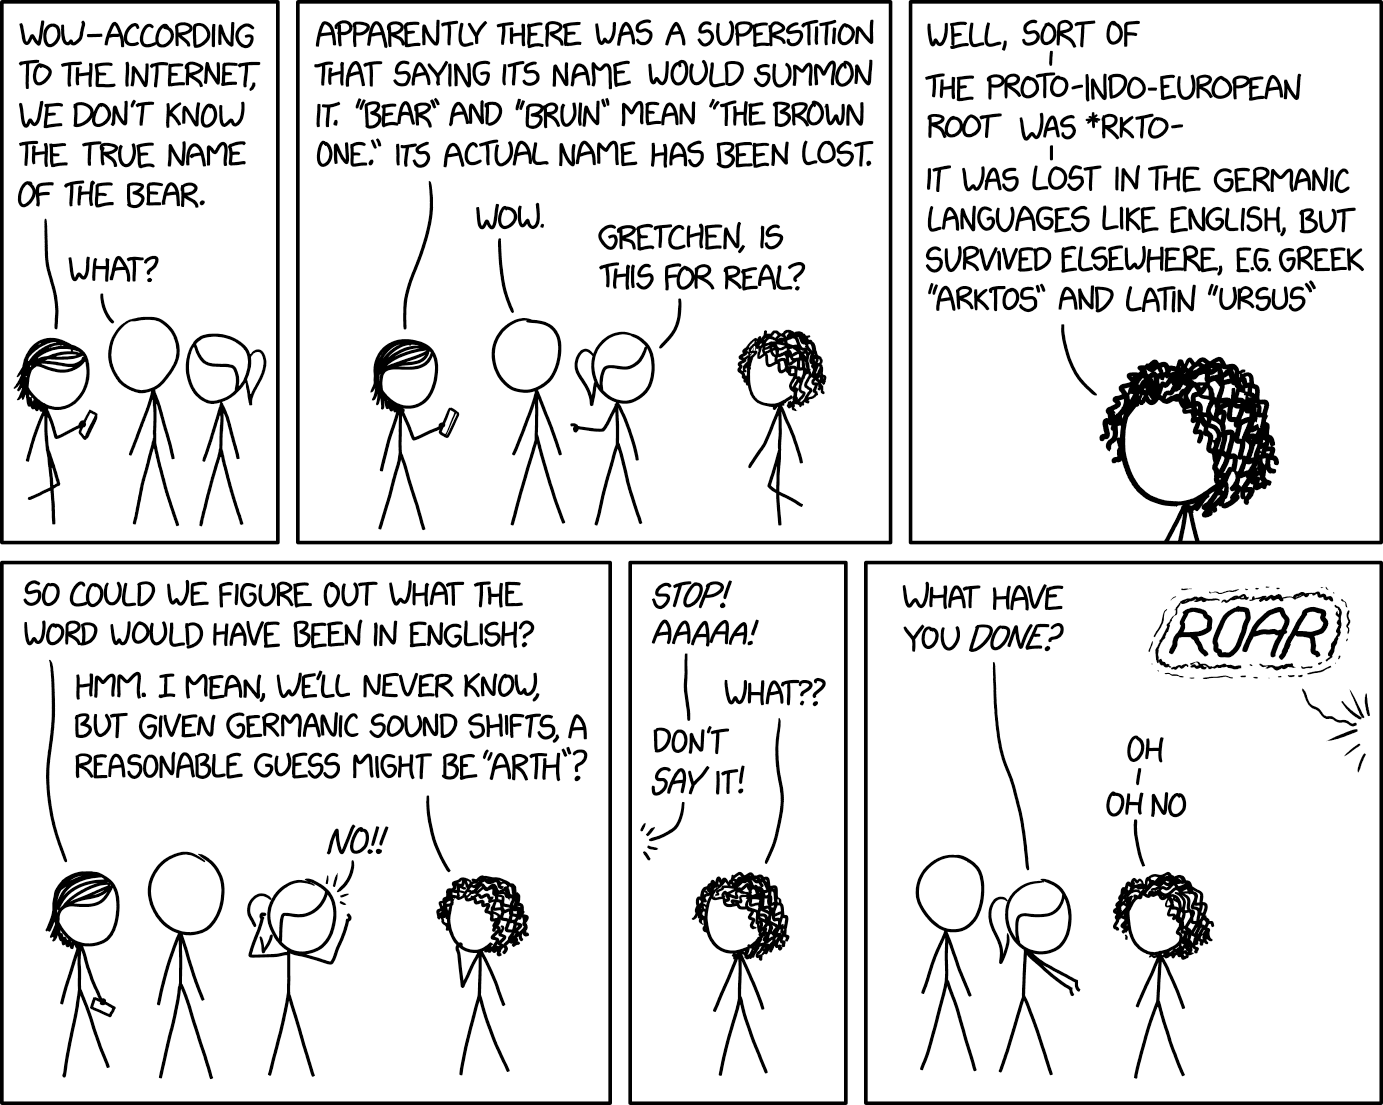 Image courtesy of XKCD / Randall Munroe: The True Name of the Bear. "Thank you to Gretchen McCulloch for fielding this question, and sorry that as a result the world's foremost internet linguist has been devoured by the brown one. She will be missed."